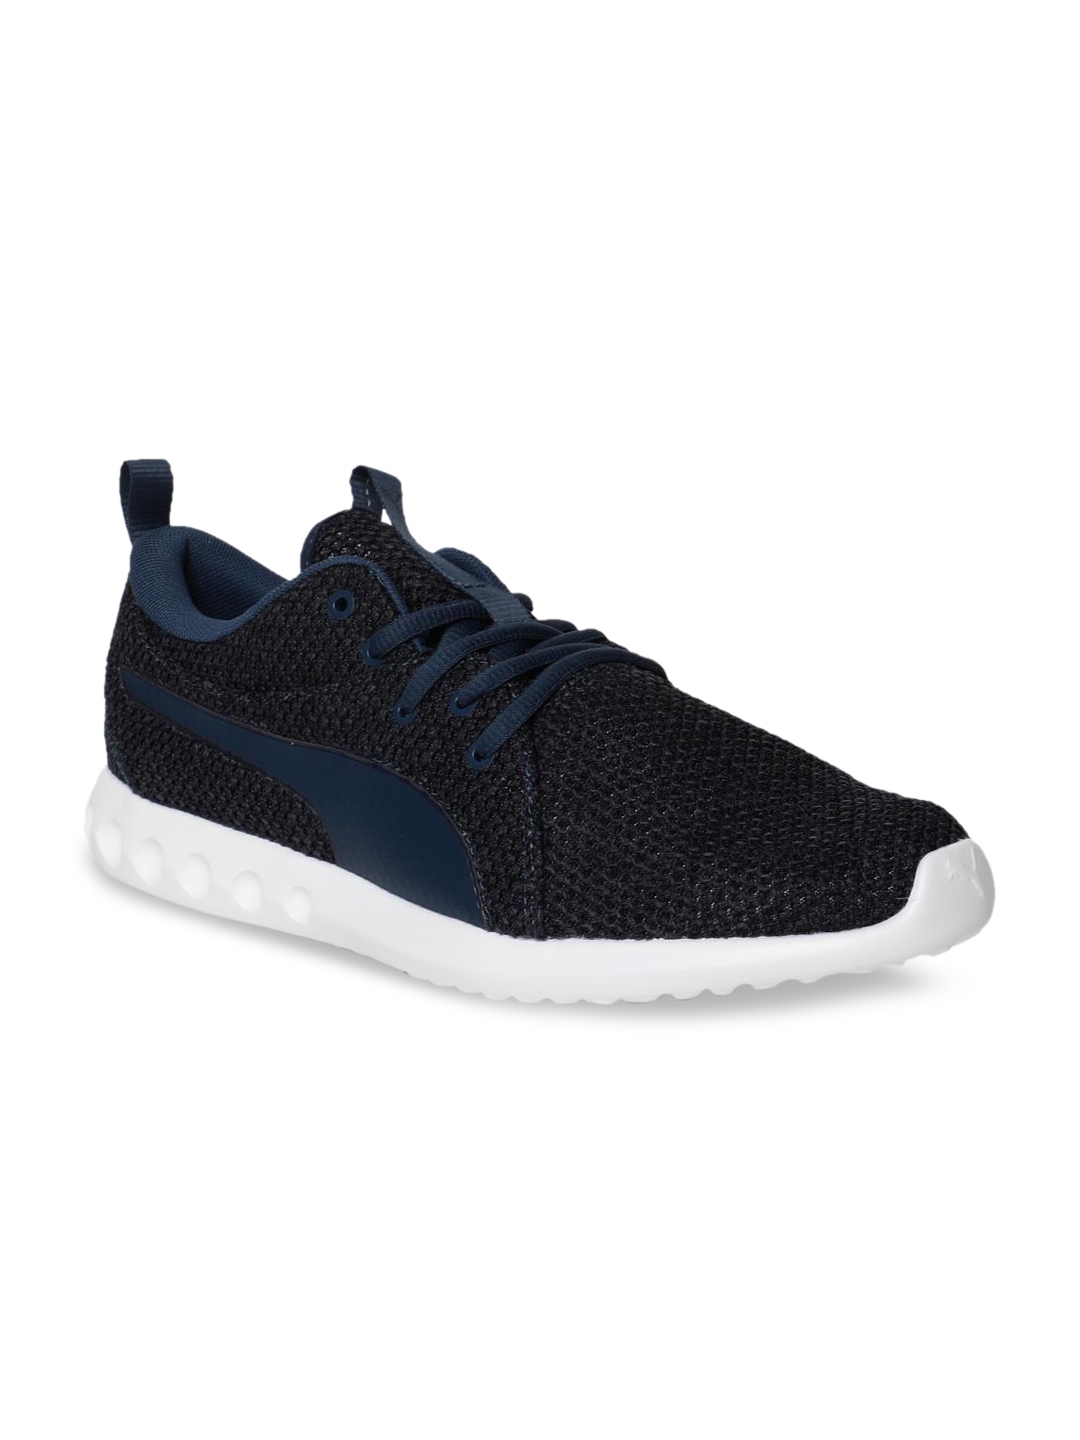 Buy Puma Men Blue Textile Carson 2 Nature Knit Mid Top Running Shoes - Shoes 10262137 | Myntra